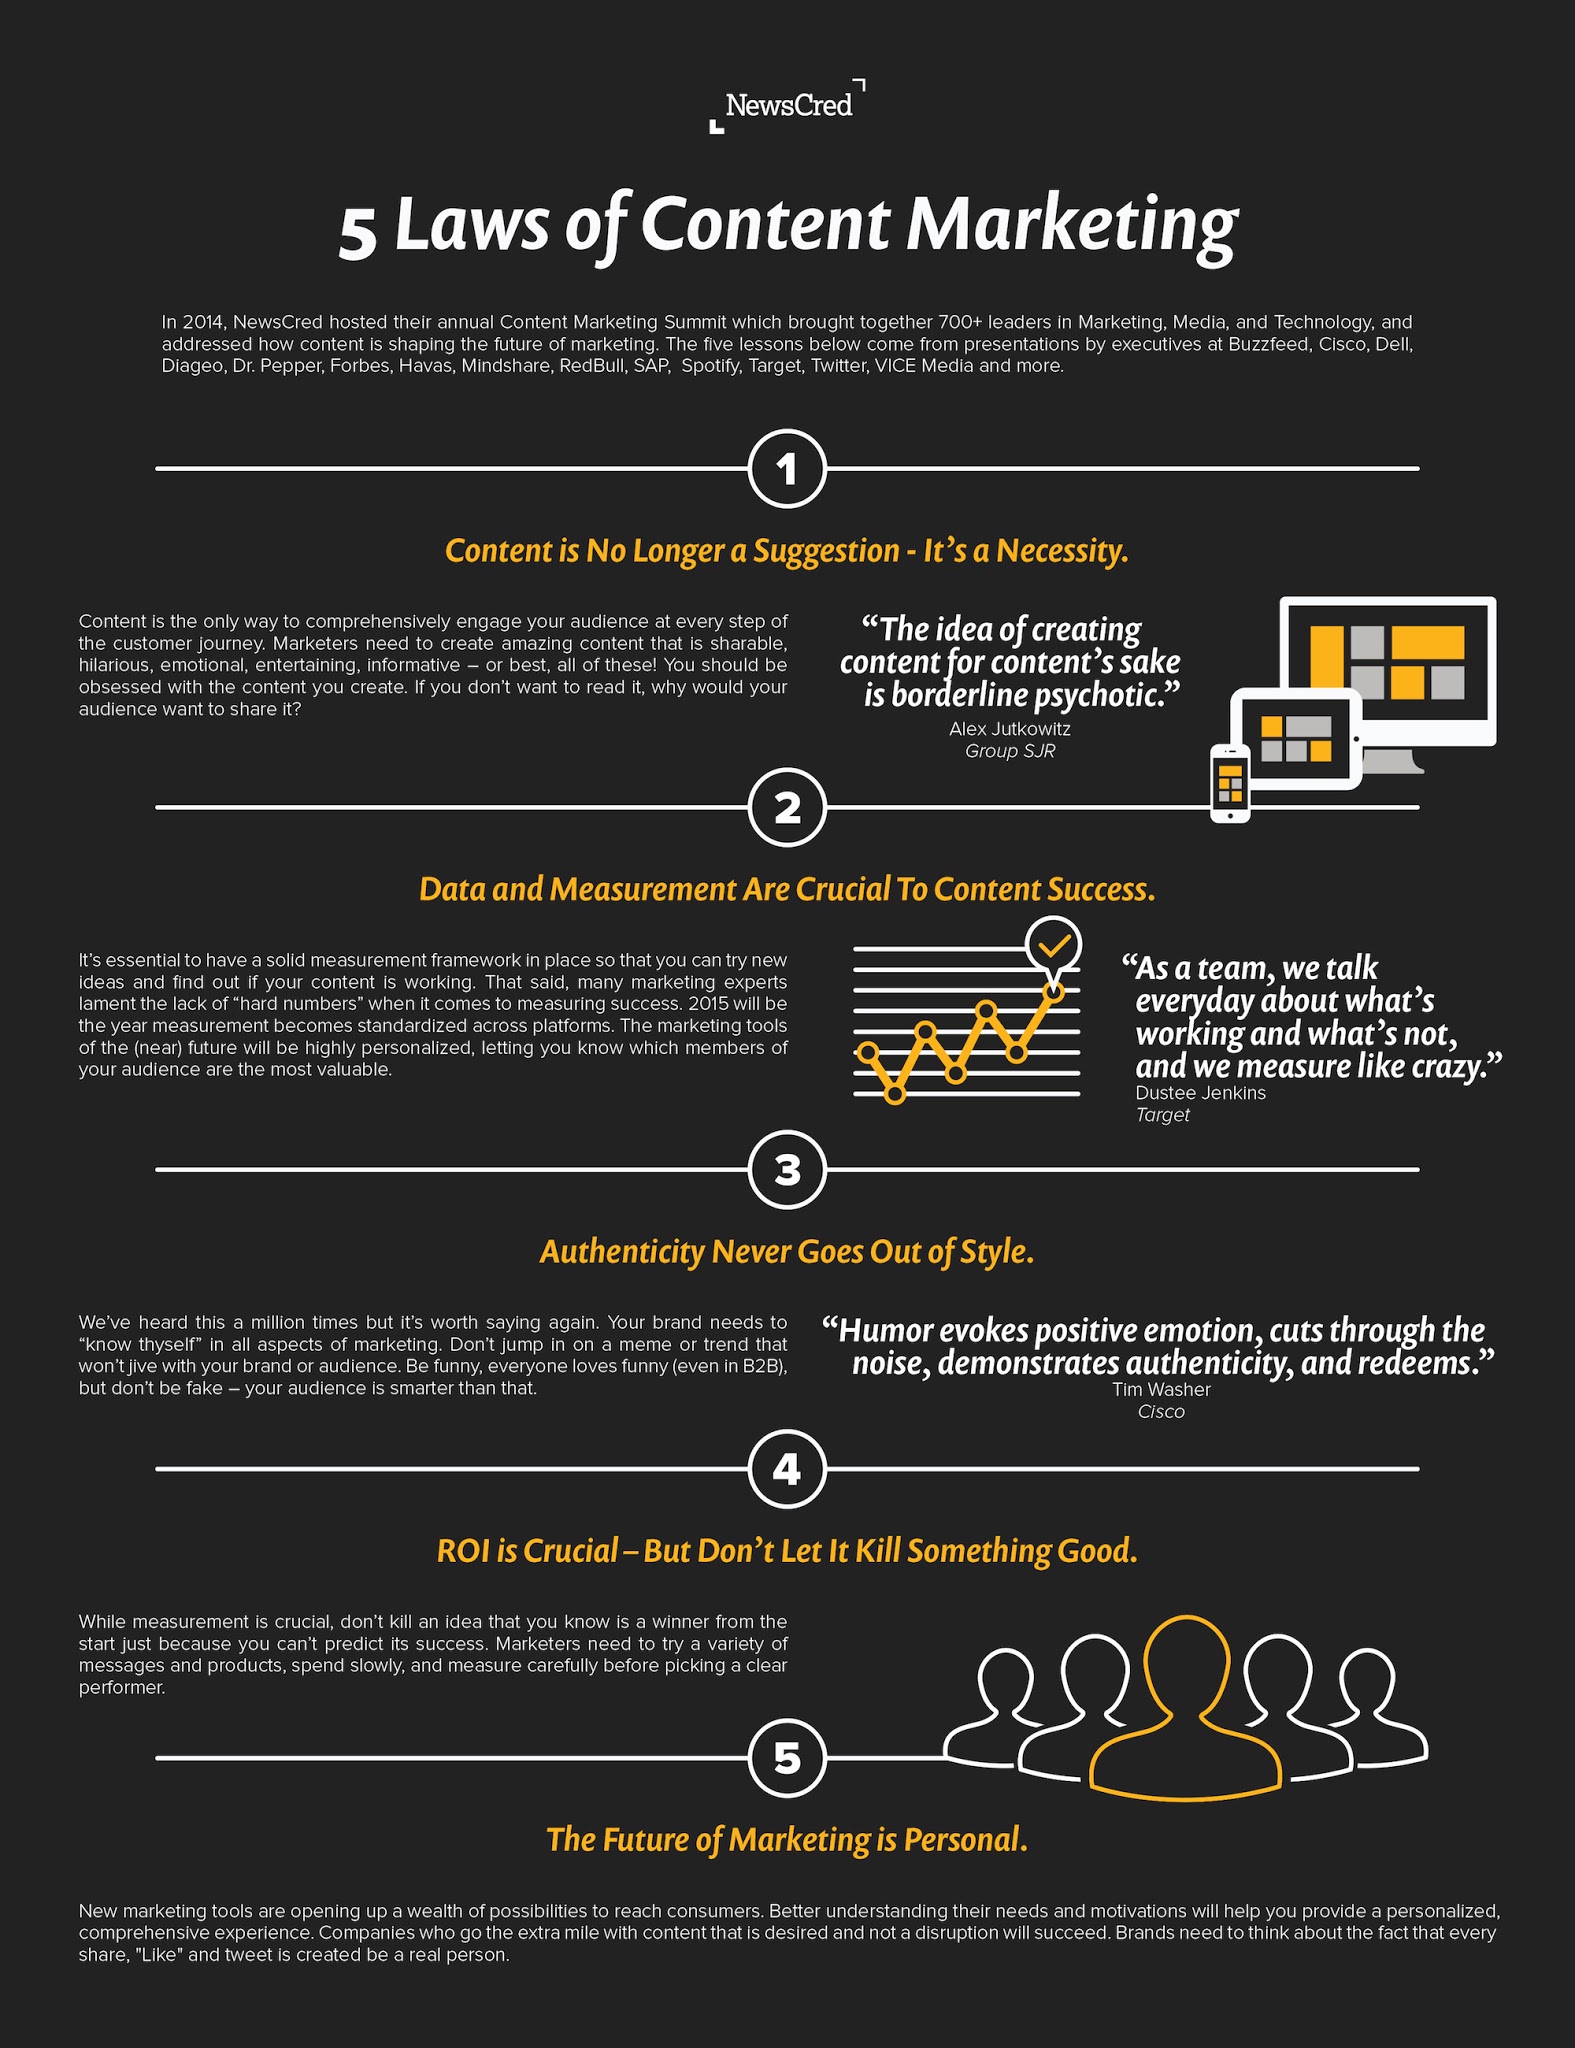 The 5 Laws Of Content Marketing - #Infographic #ContentMarketing